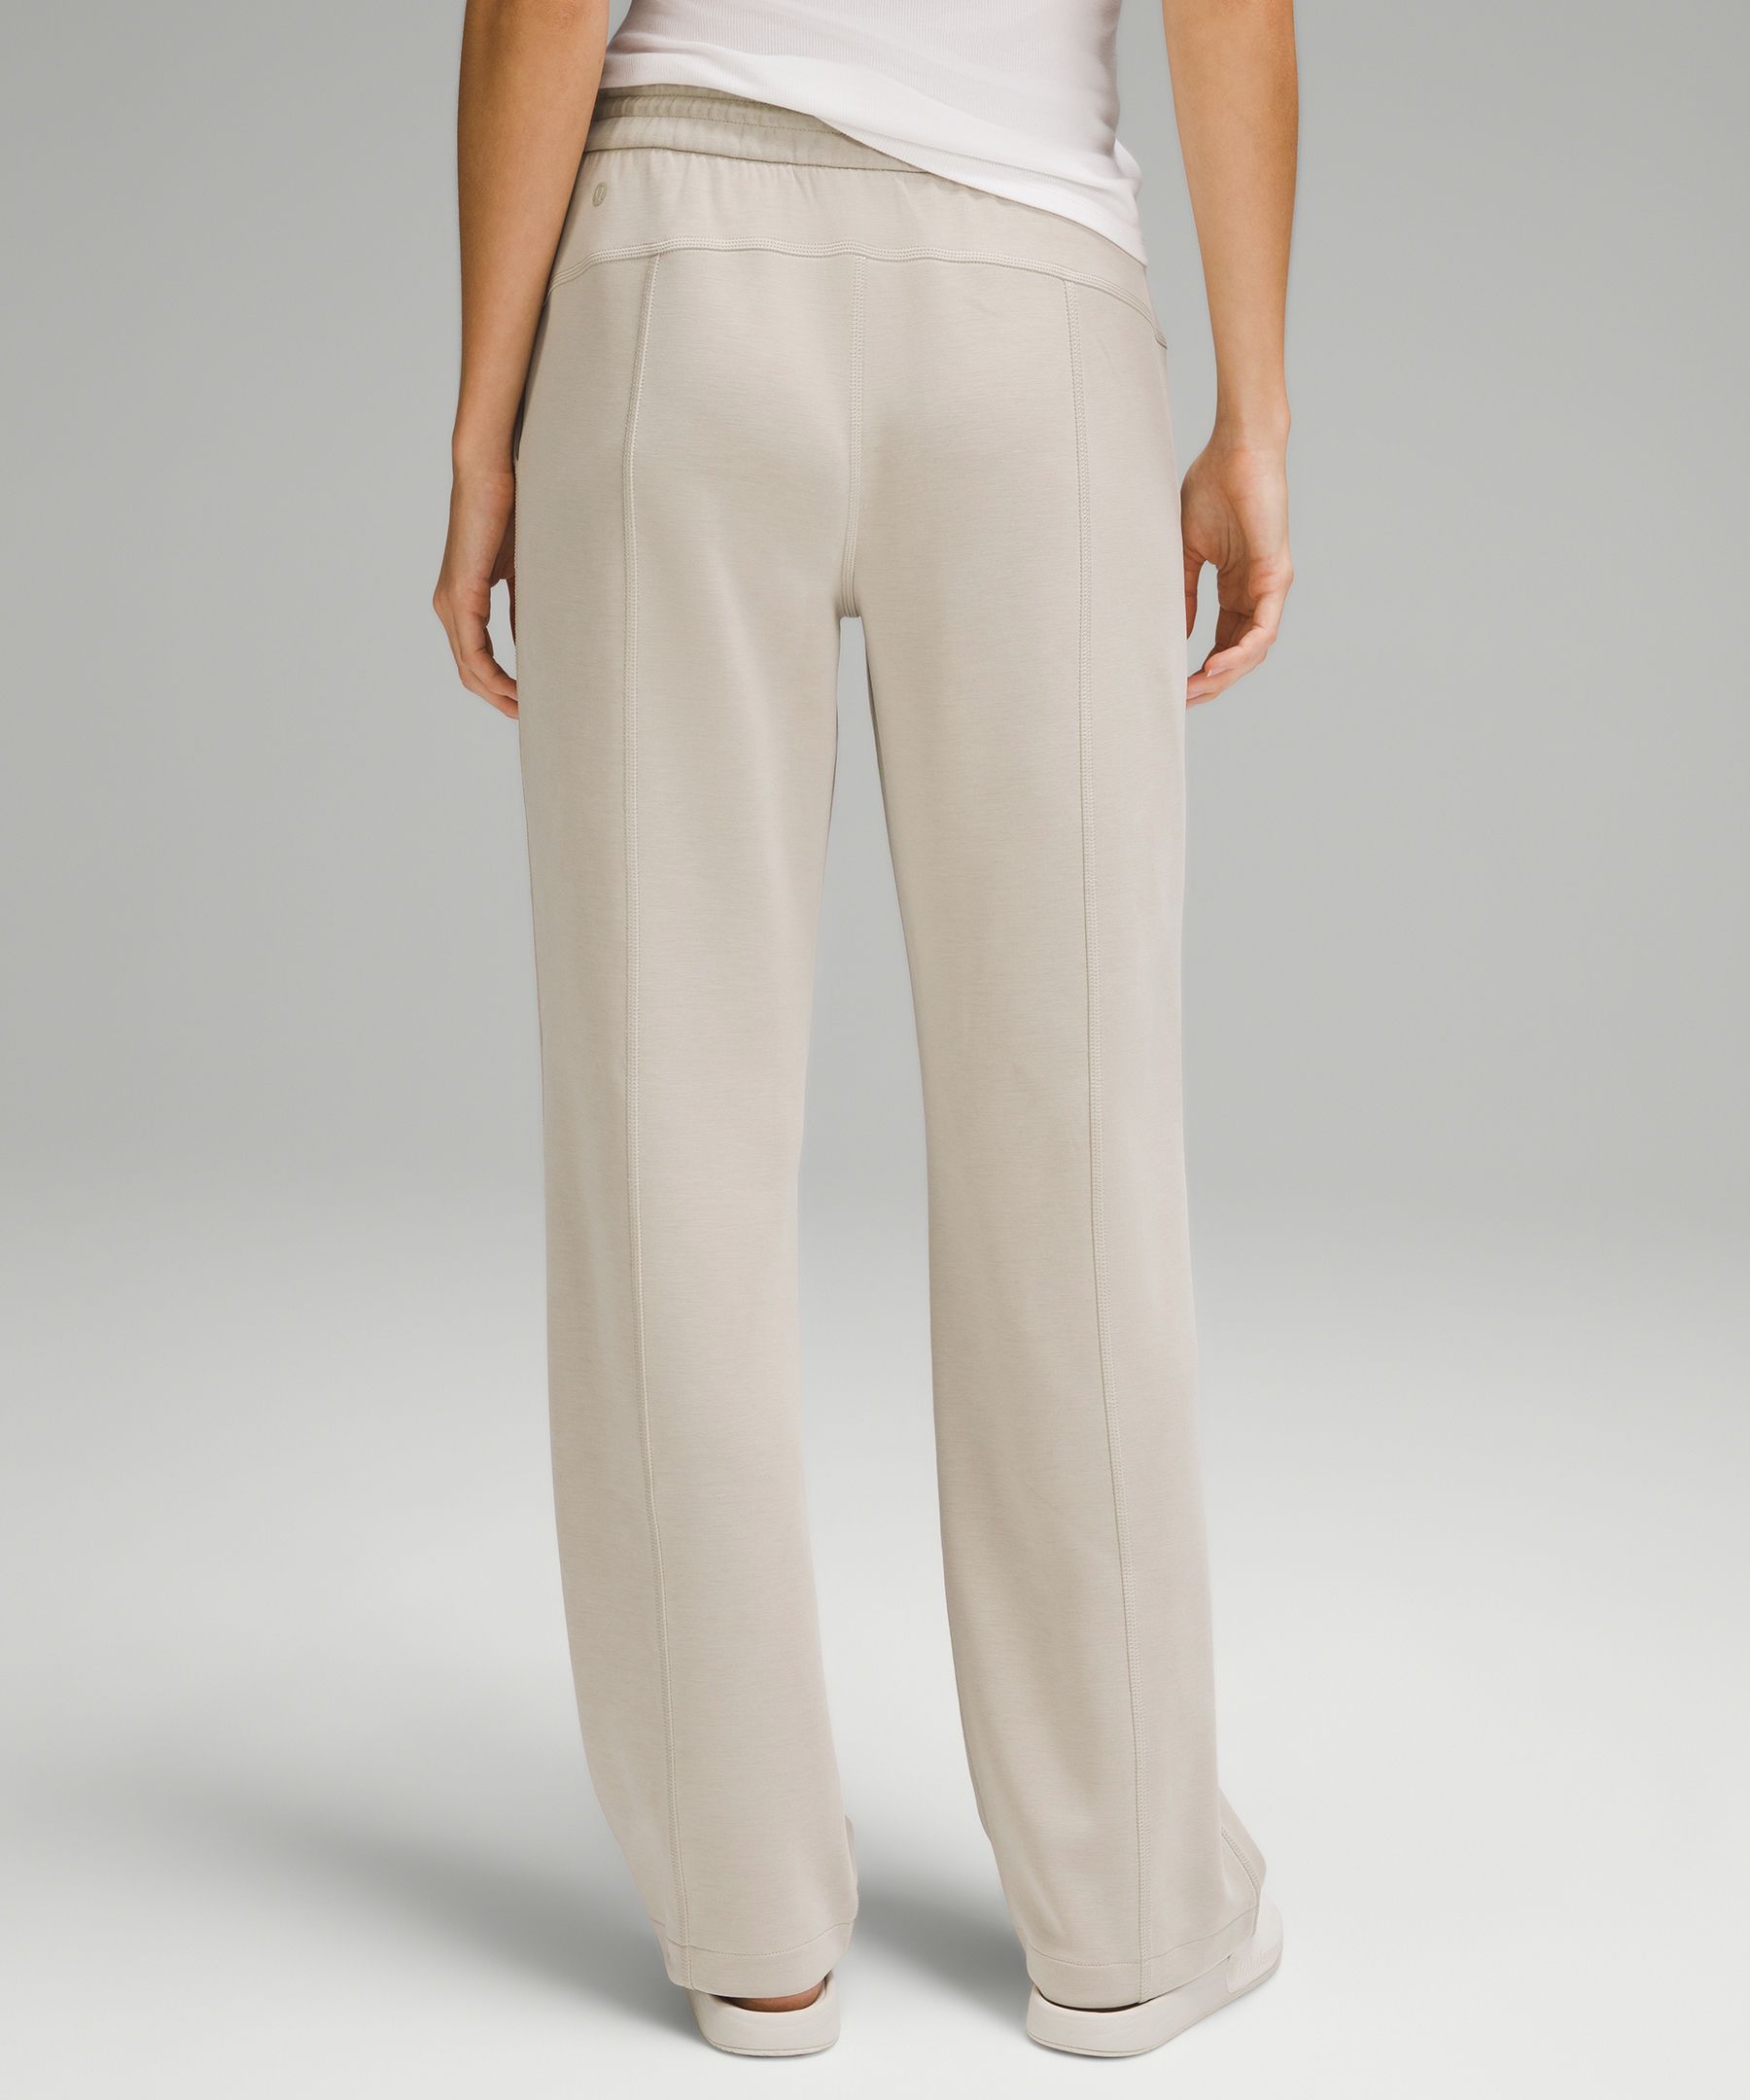 Brushed softstreme HR pants in natural ivory…pockets are totally